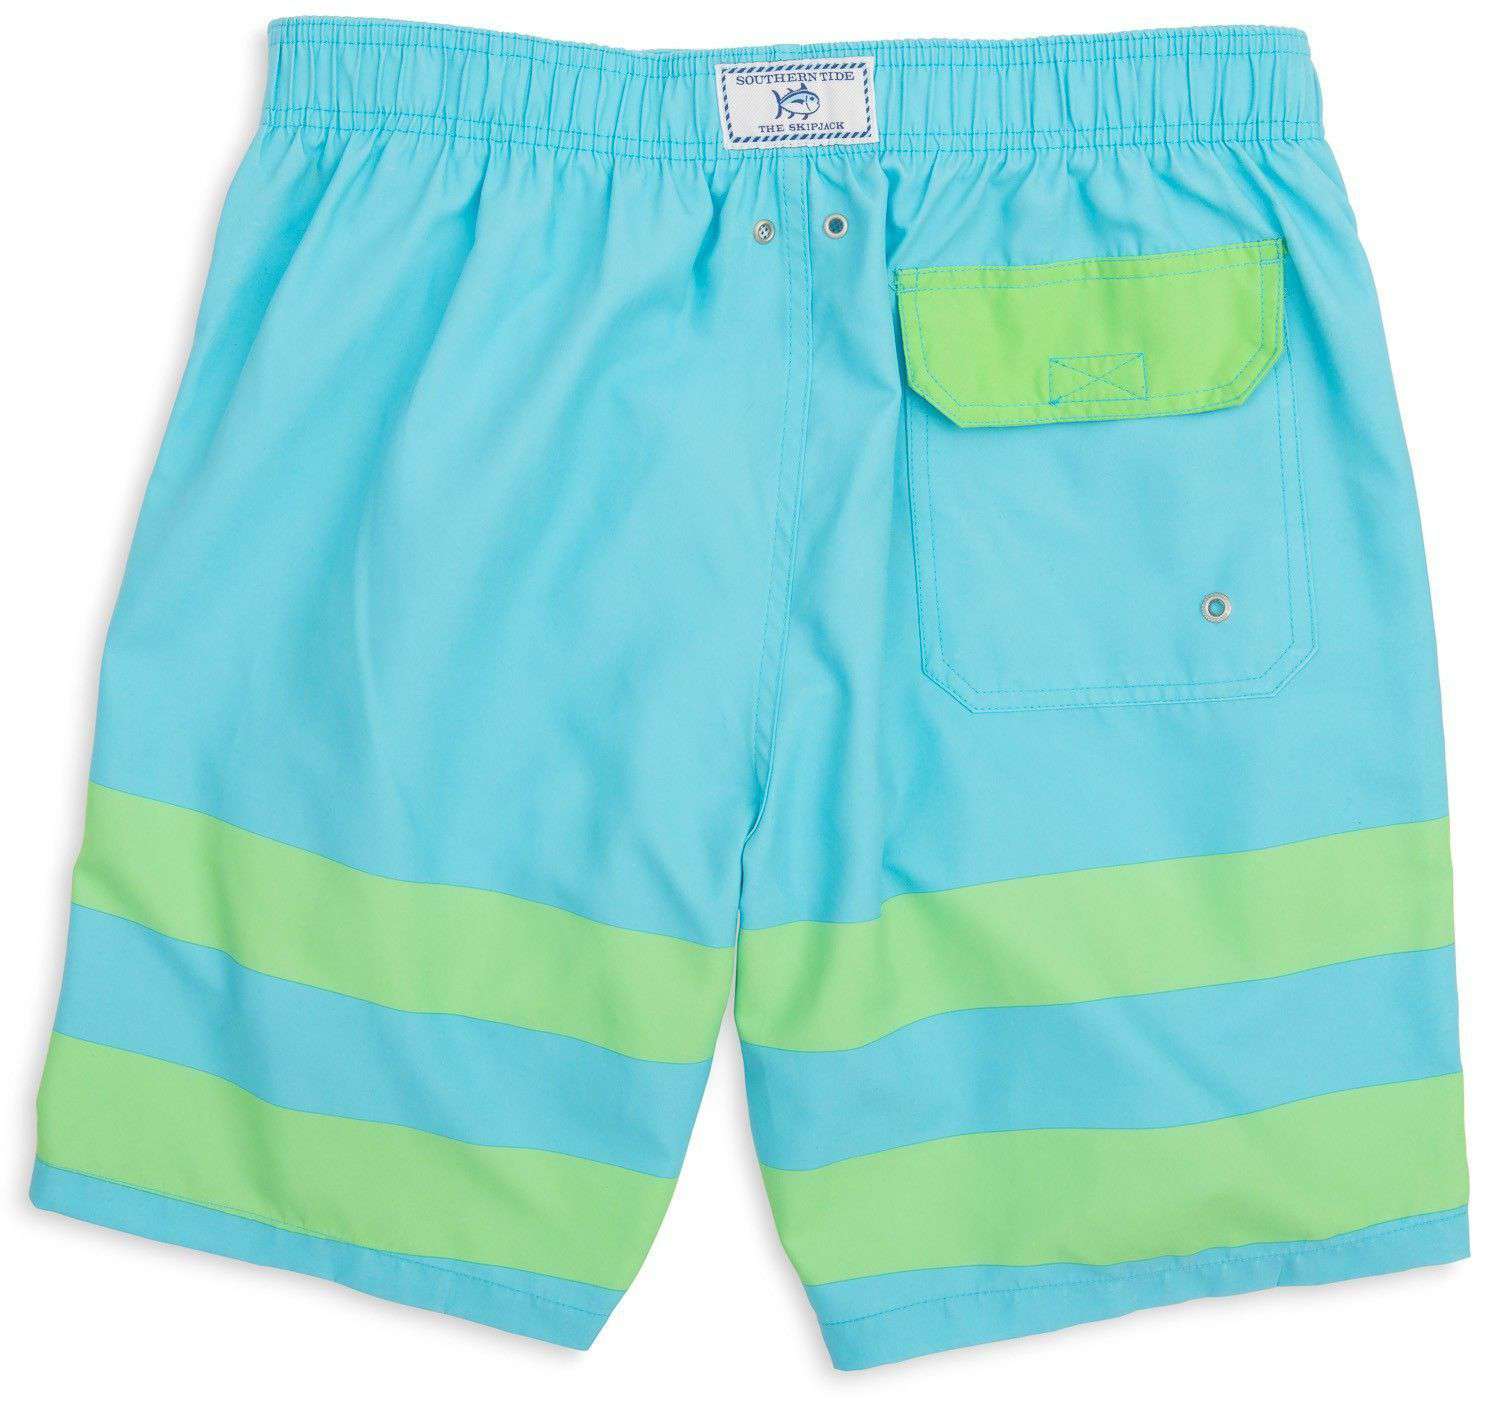 Hang Ten Swim Trunks in Turquoise Blue by Southern Tide - Country Club Prep